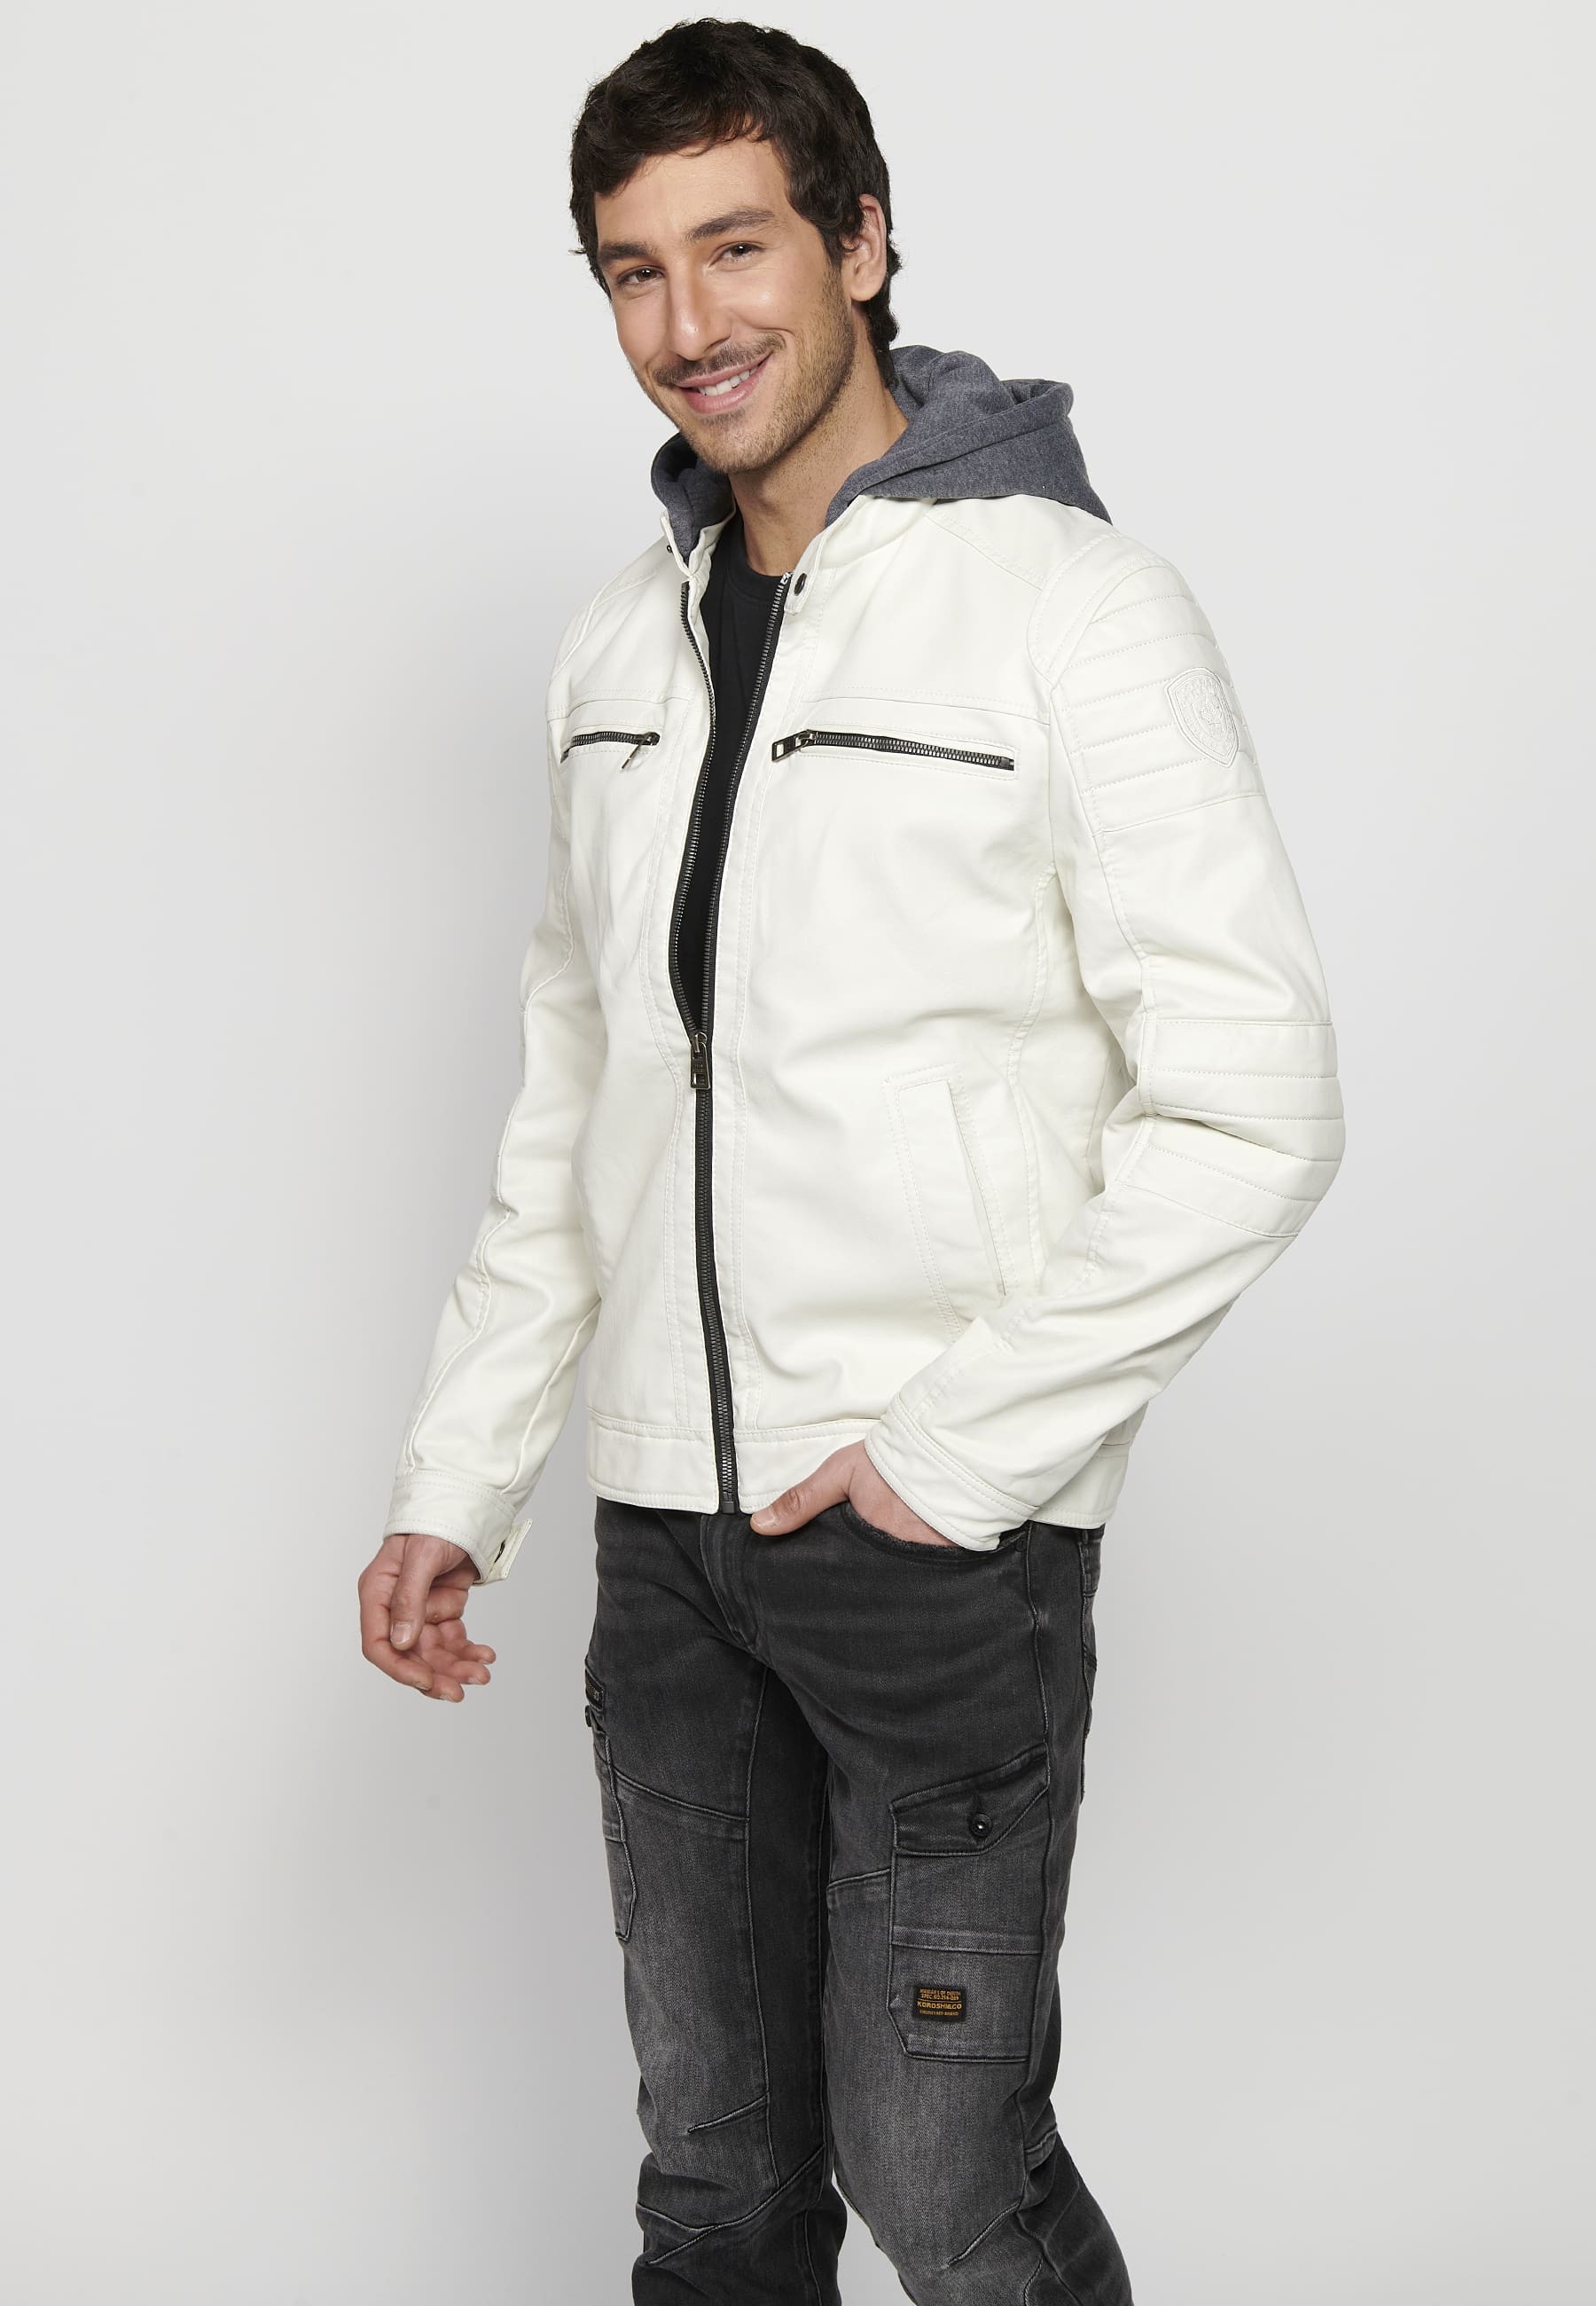 Long-sleeved jacket with zipper front closure and adjustable detachable hooded collar with drawstring in Ecru for Men 1